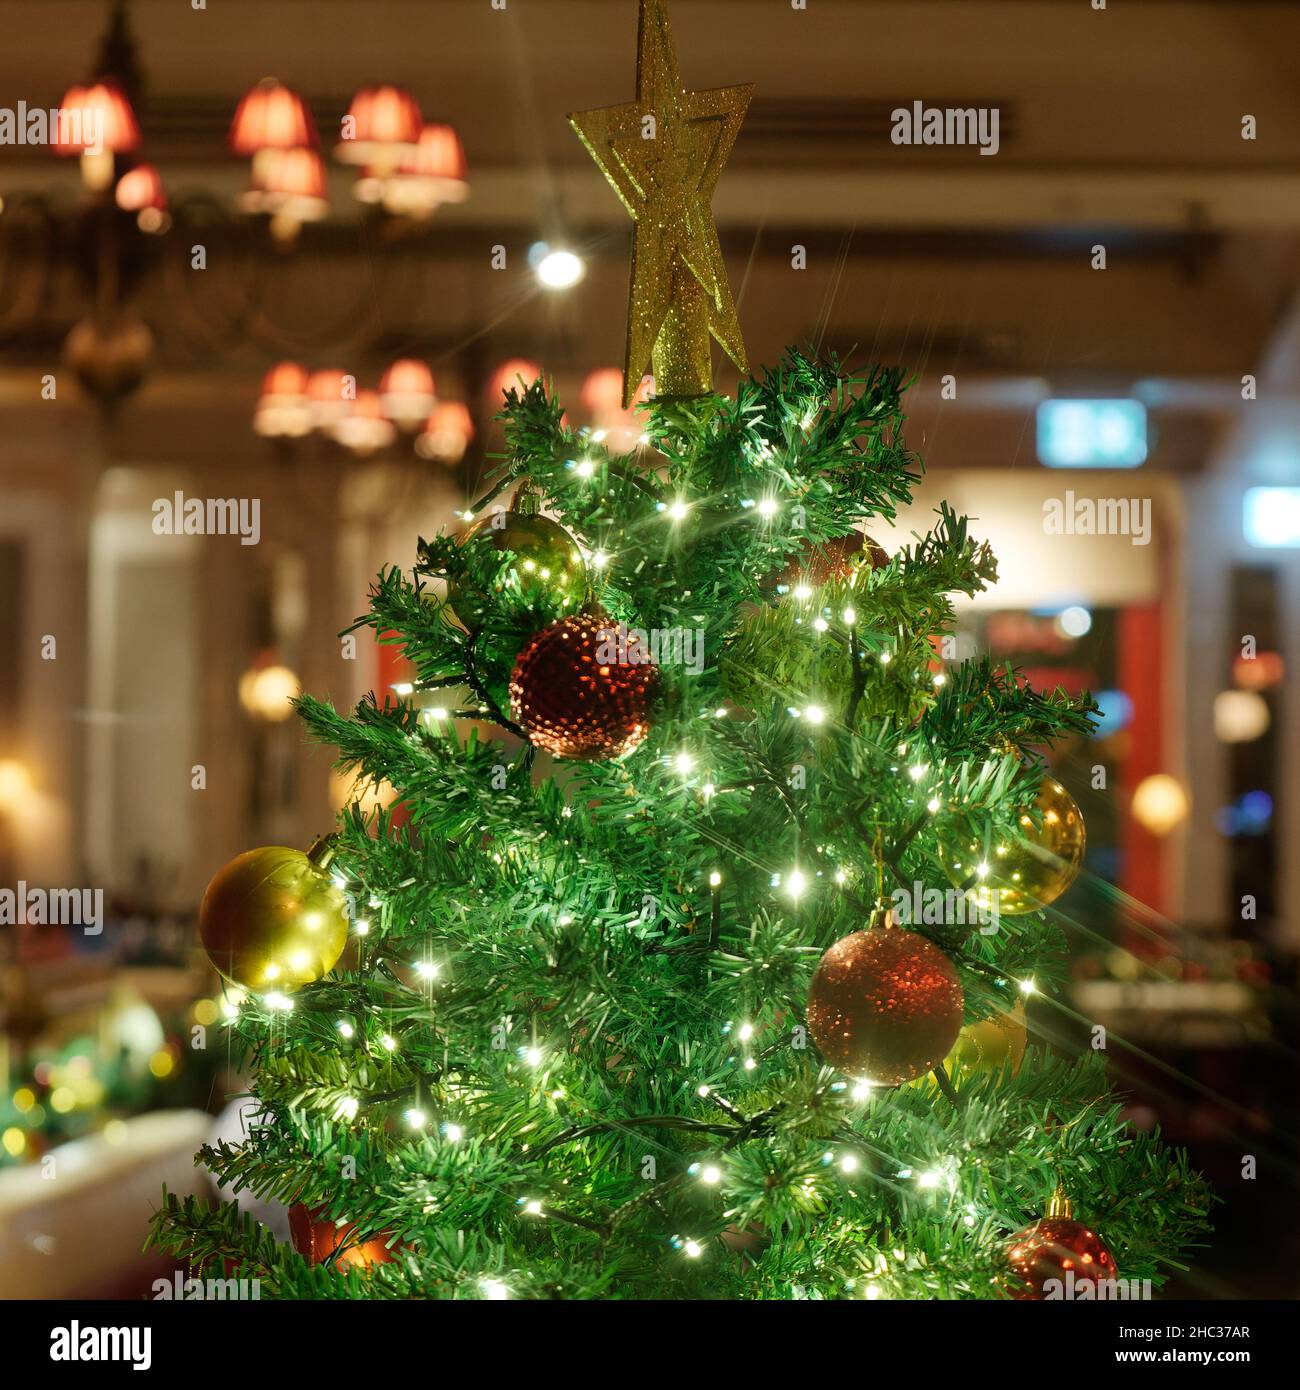 London, Greater London, England, December 15 2021: Top of a Christmas Tree with decorations and a star in a restaurant. Stock Photo